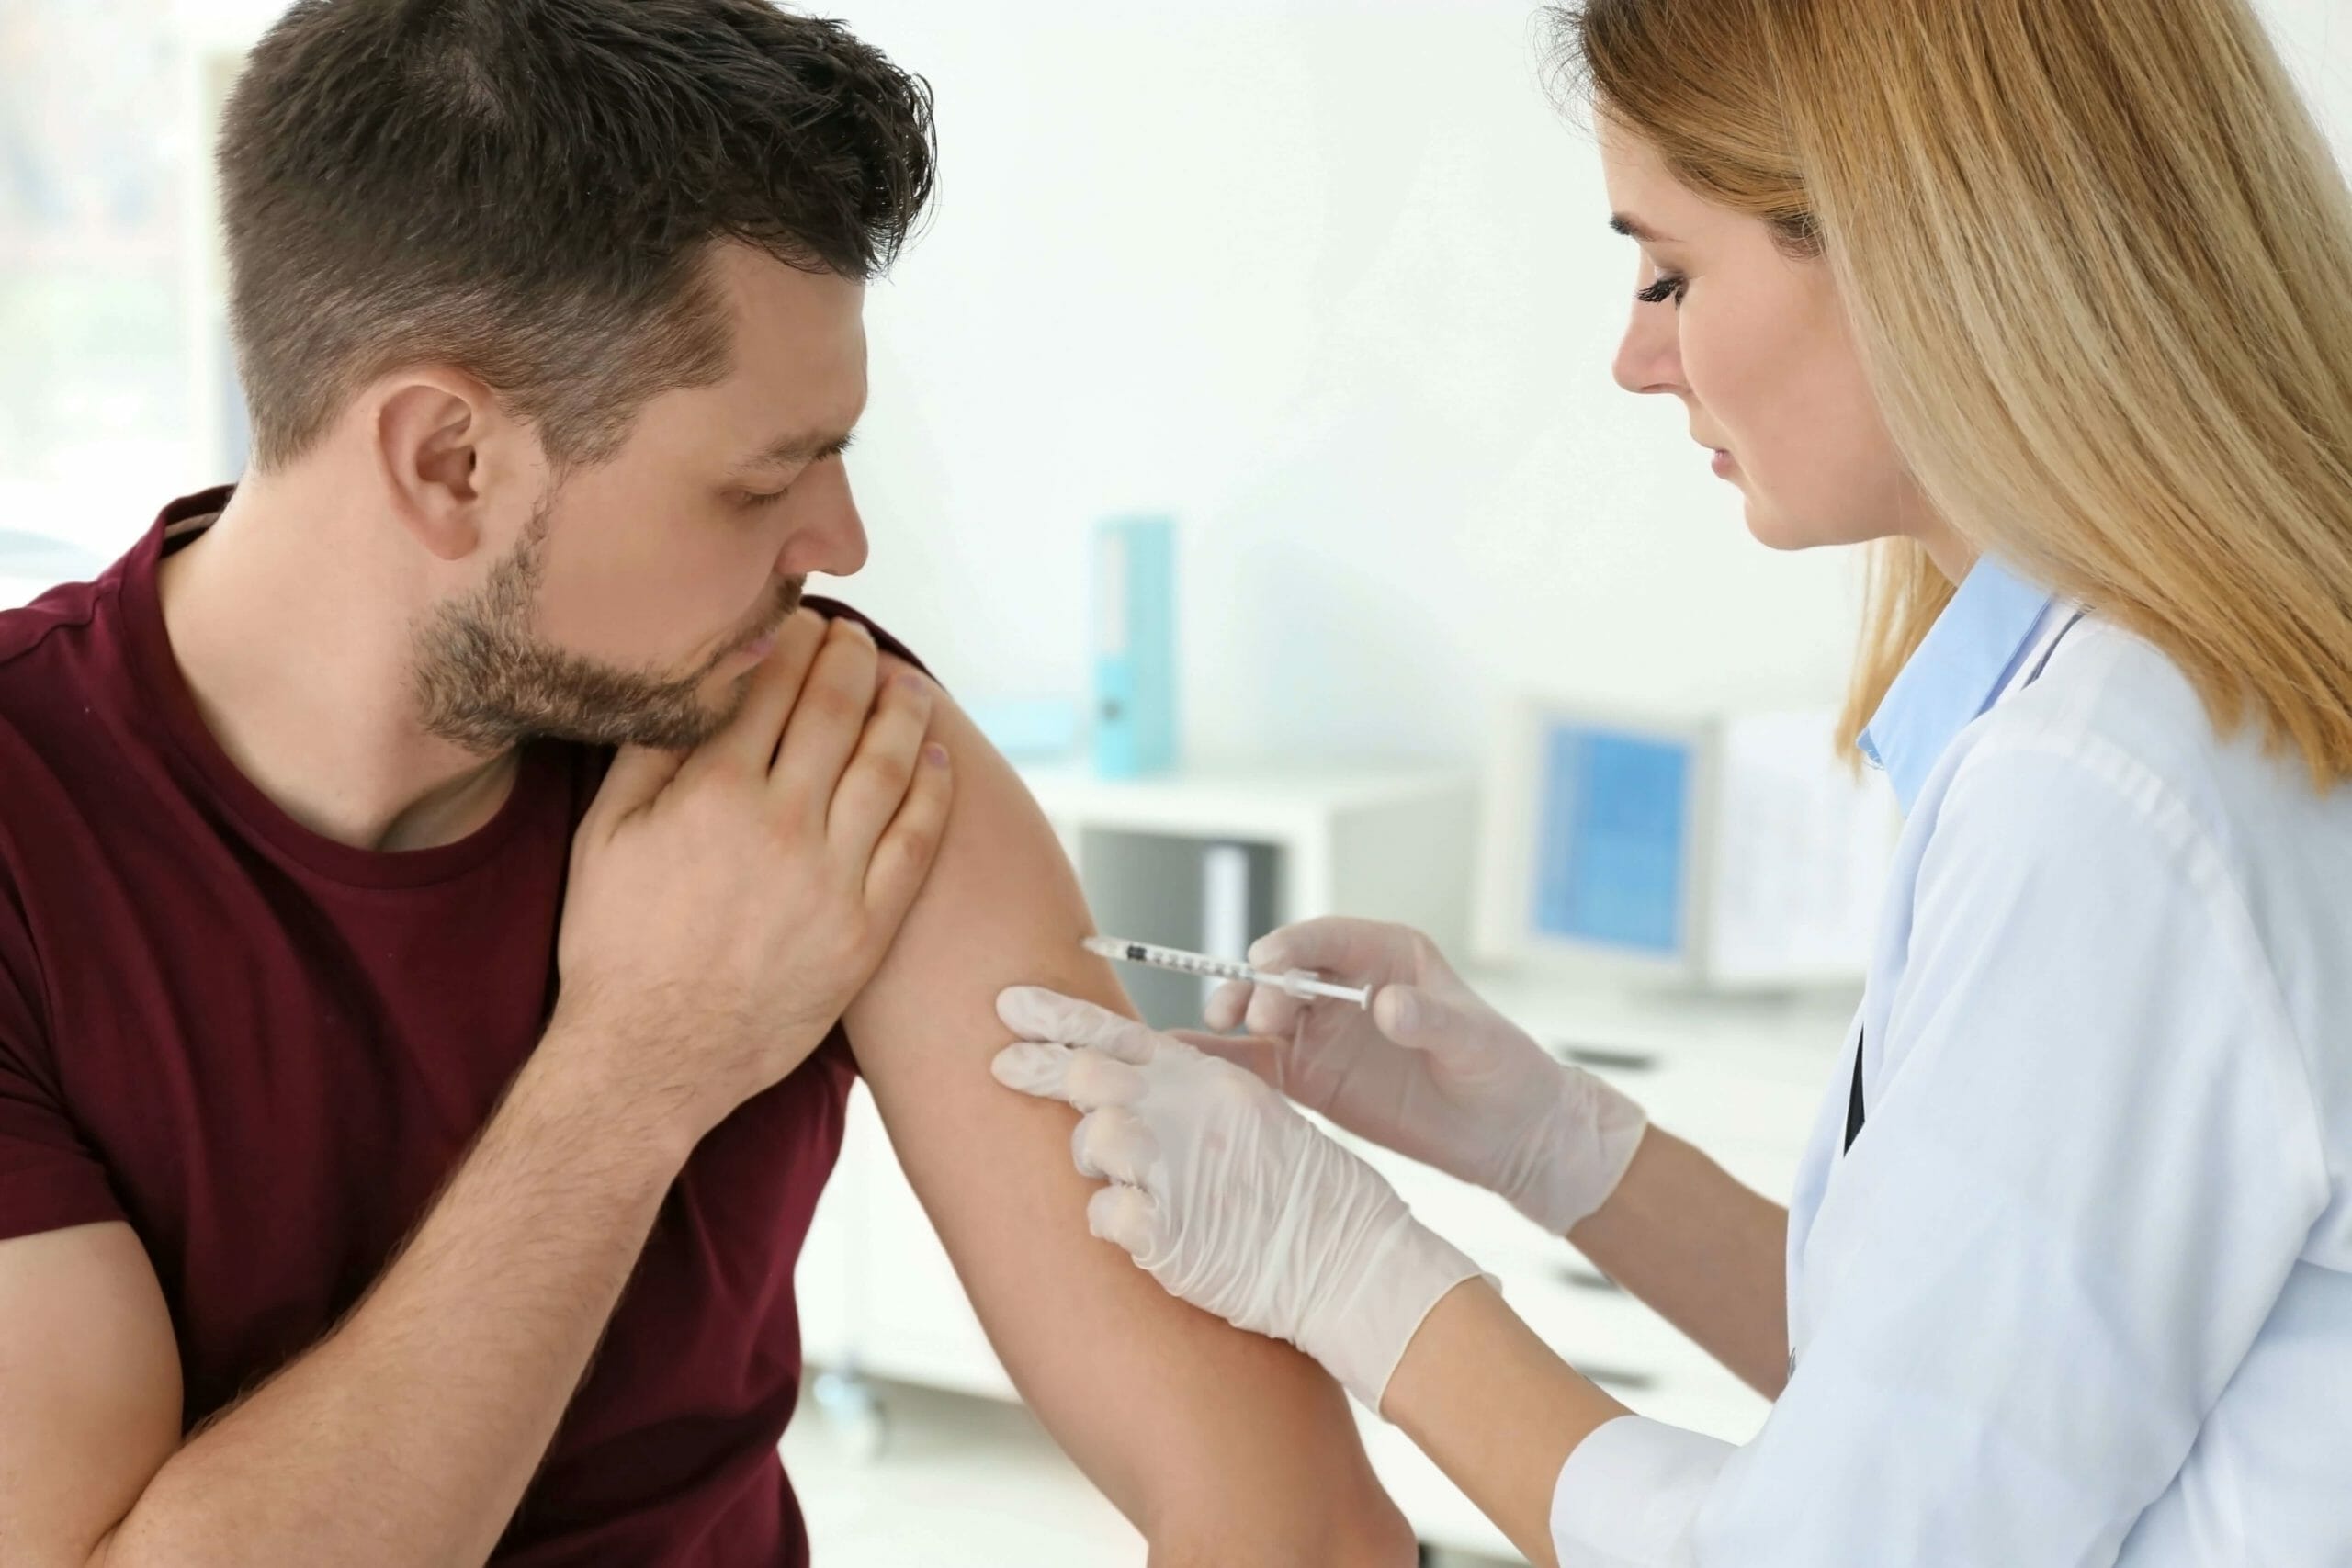 addict receiving Vivitrol injection from a doctor